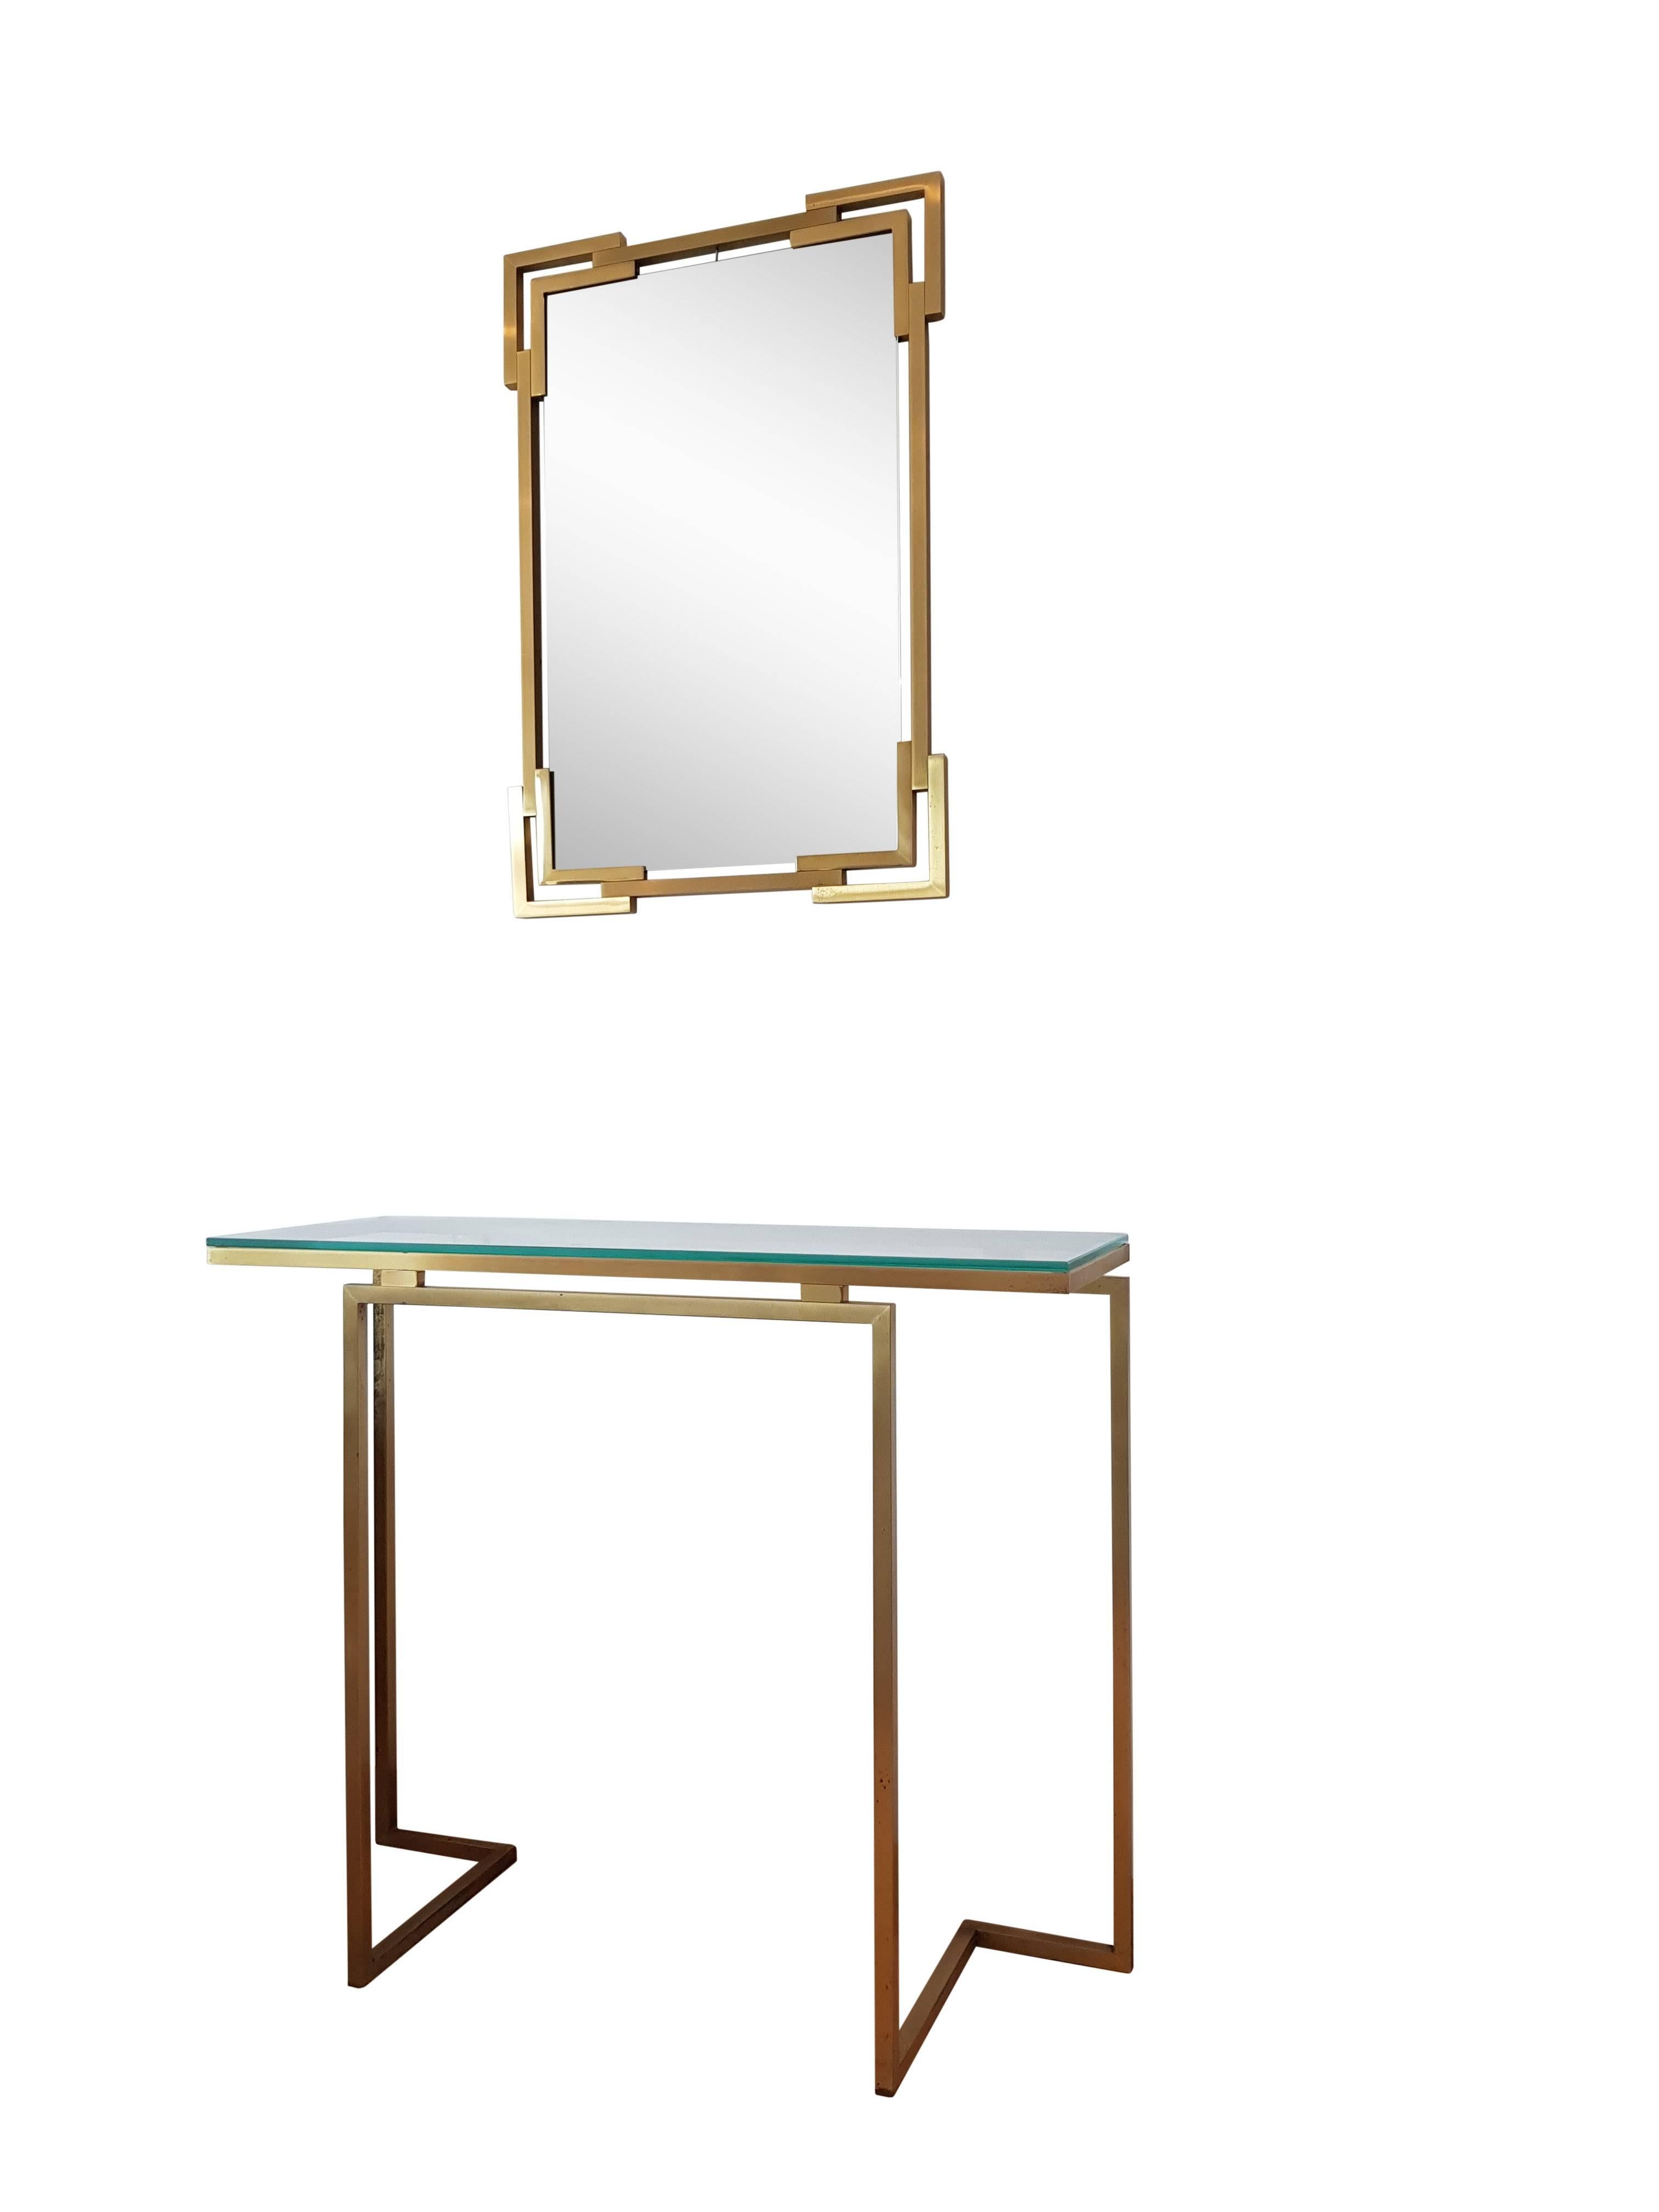 Very fine and elegant combination of a console table and a mirror from Guy Lefevre for Maison Jansen.
This is a high quality piece!
Beautiful set to combine in an interior with Willy Rizzo, Romeo Rega, J.C. Mahey.

Mirror size; 60b, H 85, D 2 cm .